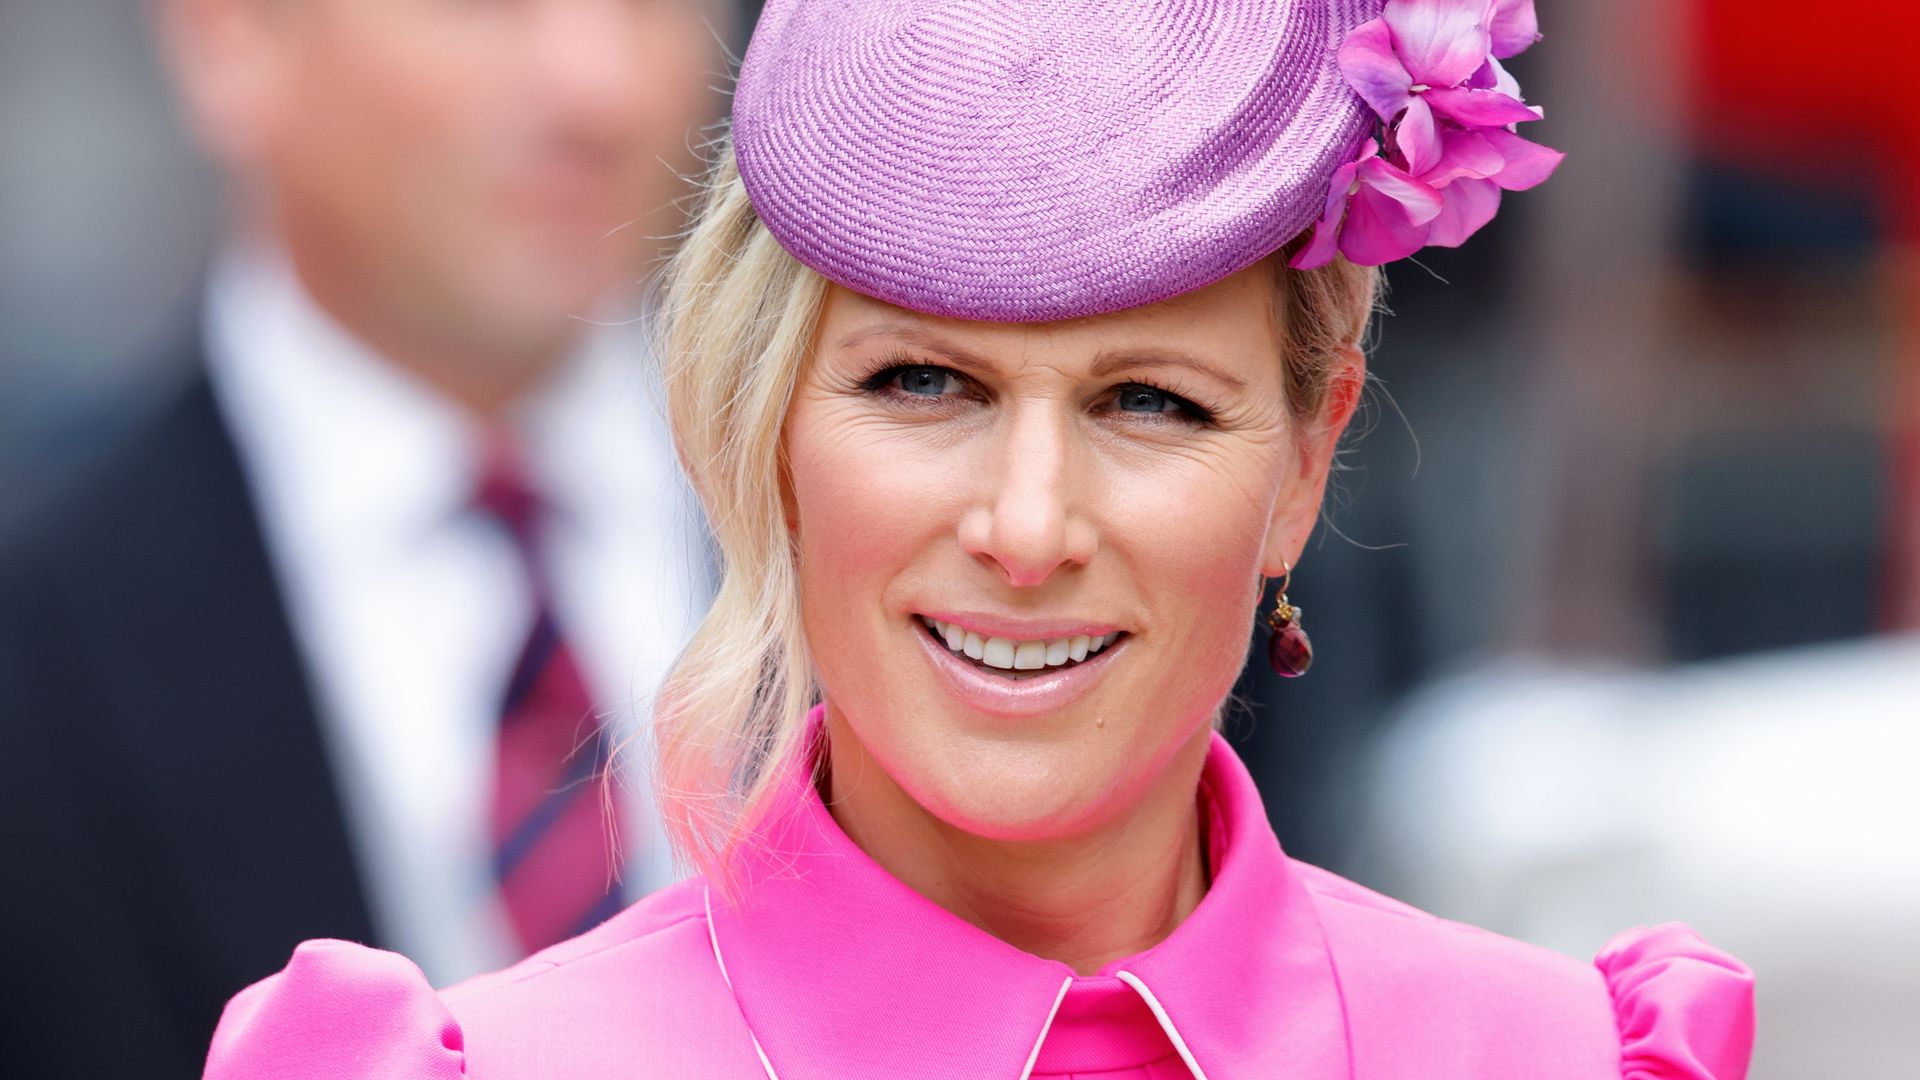 Zara Tindall attends a National Service of Thanksgiving to celebrate the Platinum Jubilee of Queen Elizabeth II at St Paul's Cathedral on June 3, 2022 in London, England.